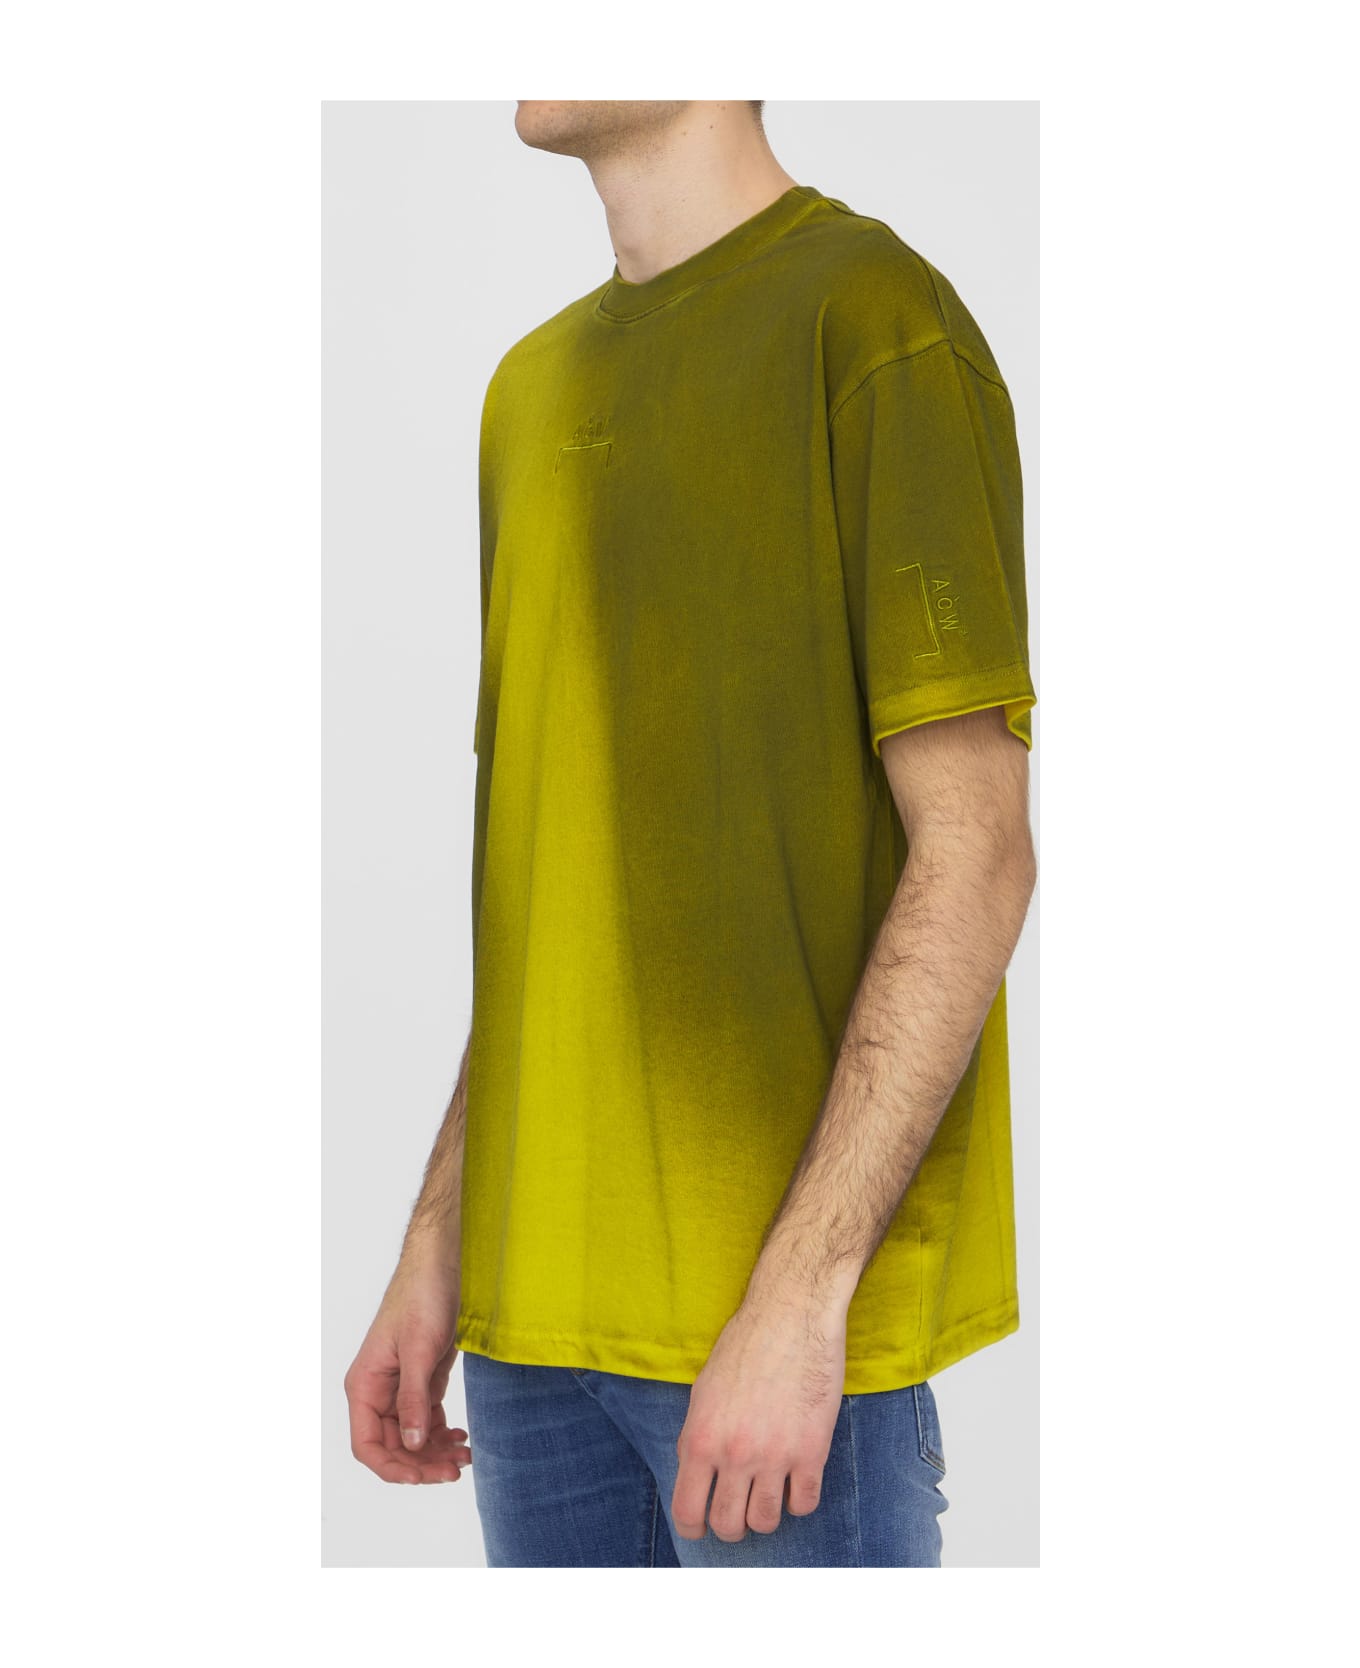 A-COLD-WALL Gradient T-shirt - YELLOW